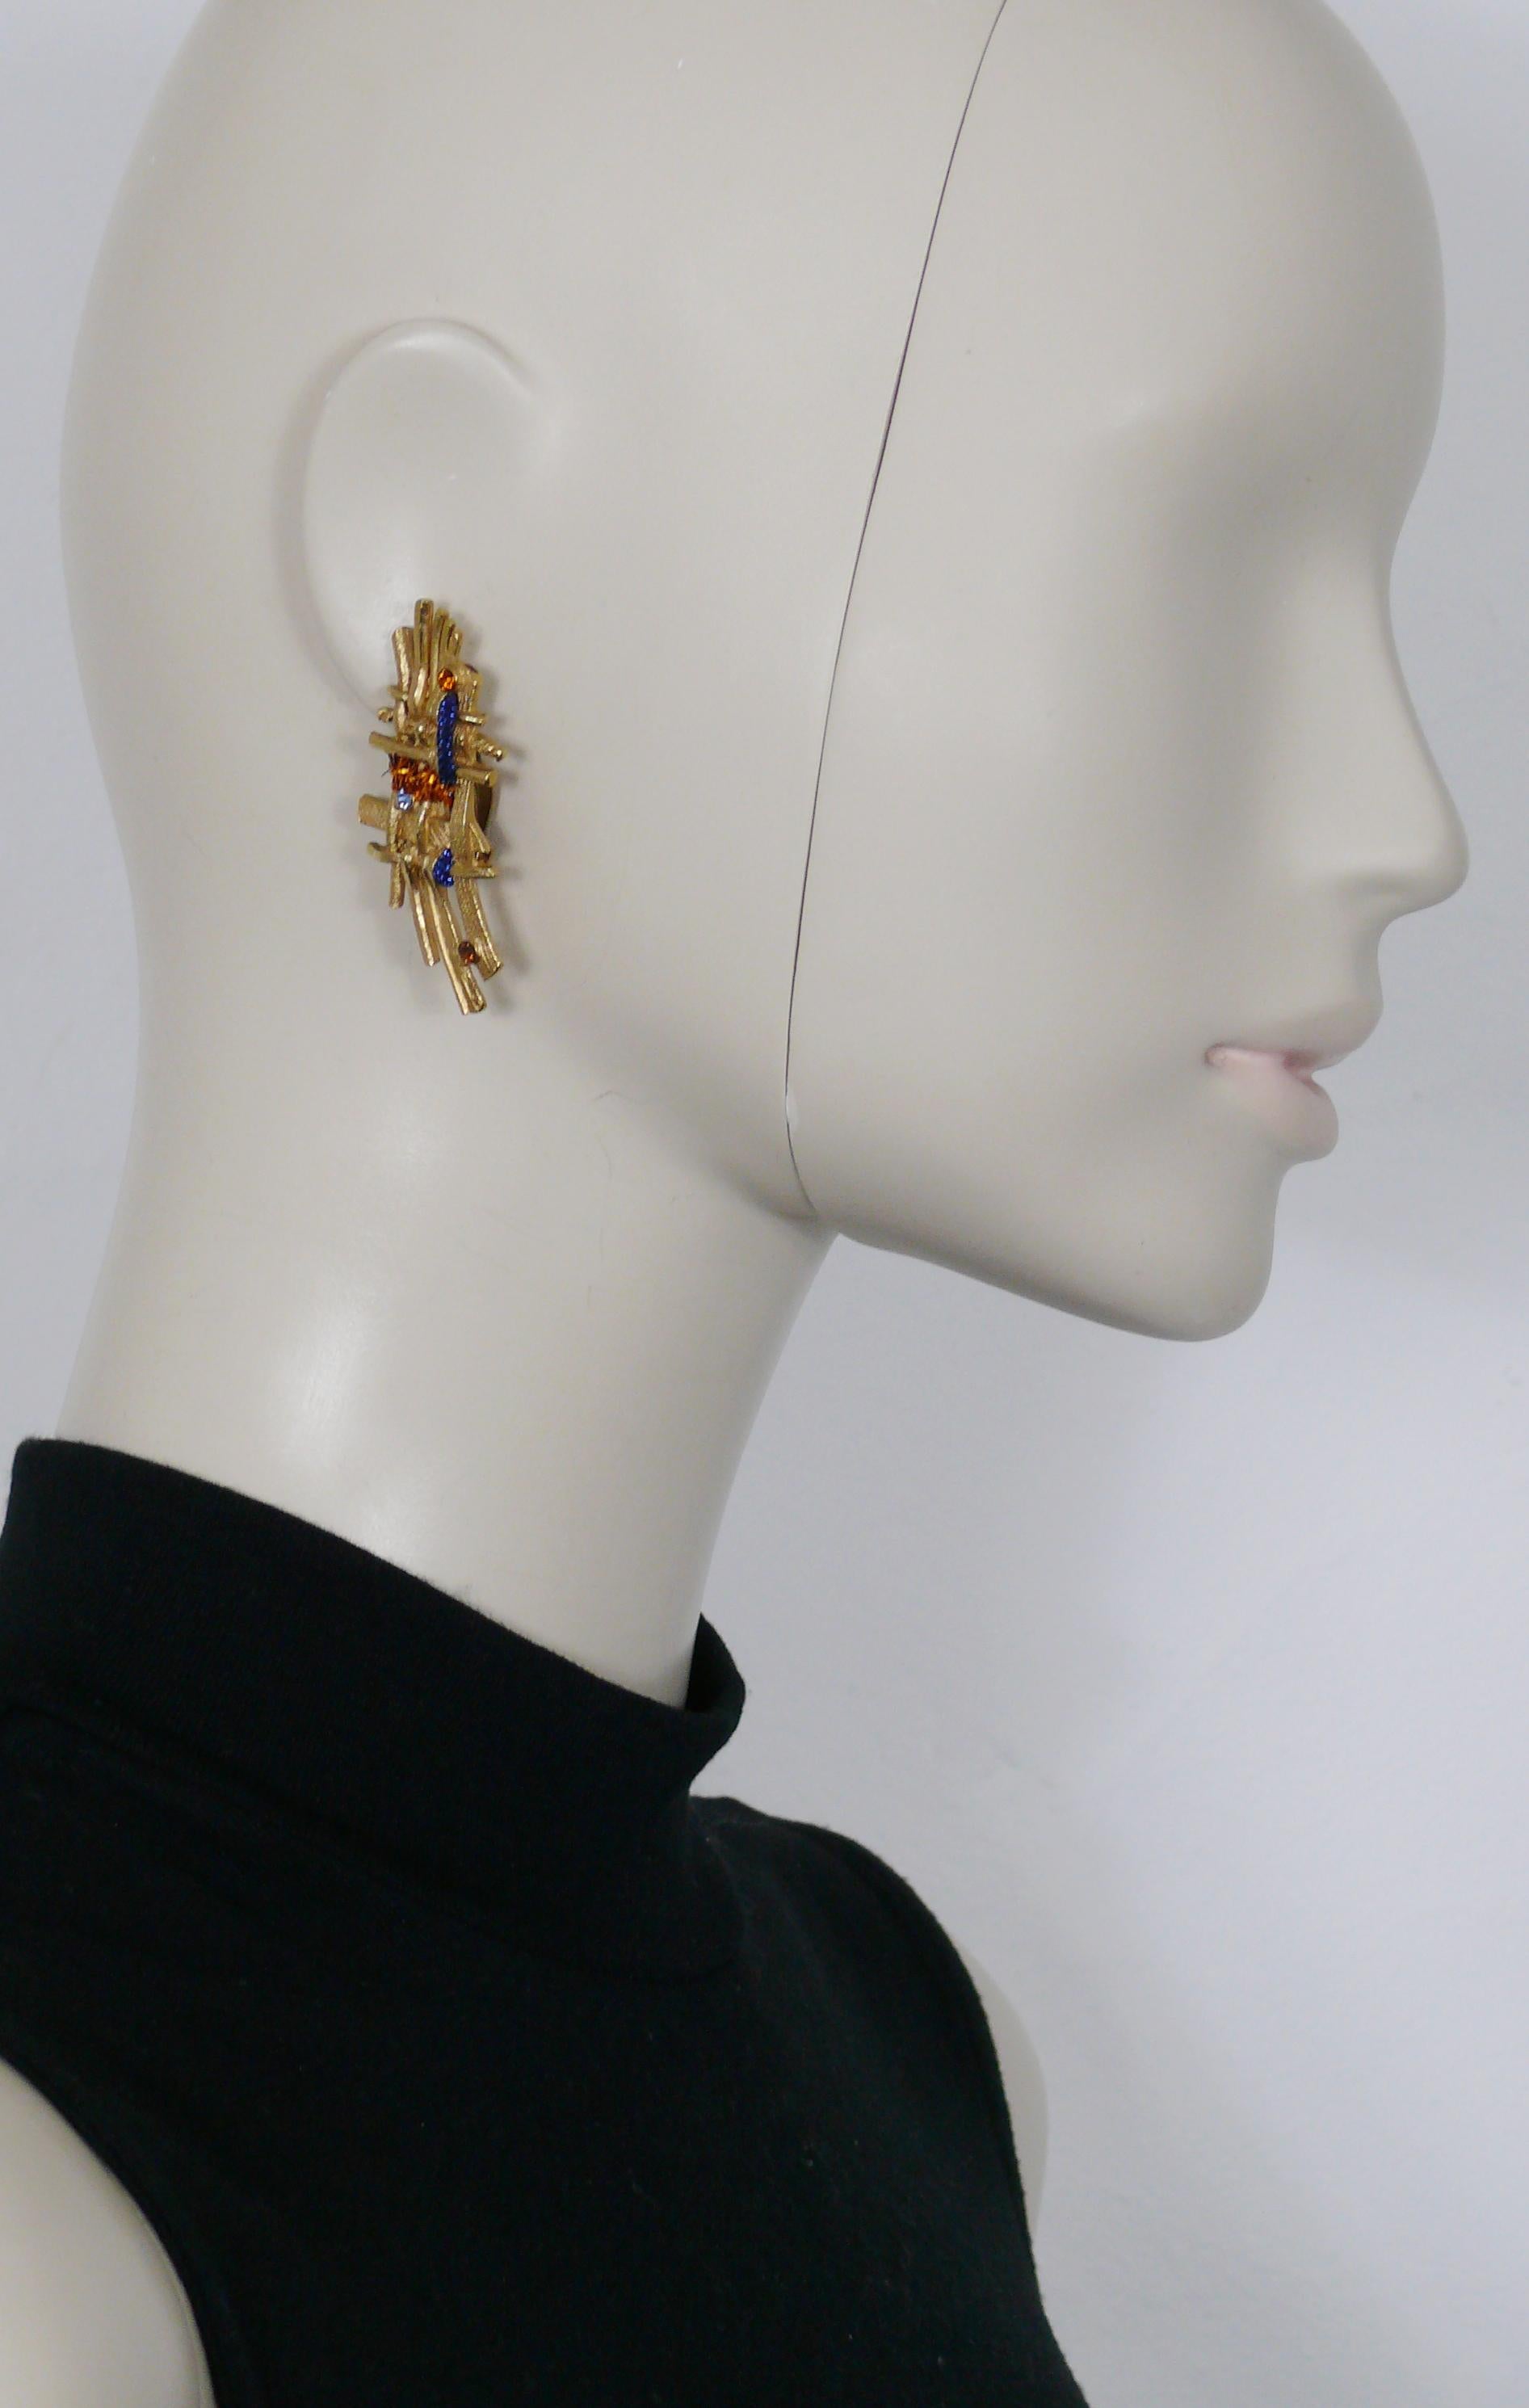 CHRISTIAN LACROIX vintage gold toned braided clip-on earrings embellished with multicolored crystals and garlands.

Marked CHRISTIAN LACROIX CL Made in France.

Indicative measurements : height approx. 5.5 cm (2.17 inches) / max. width approx. 2.1